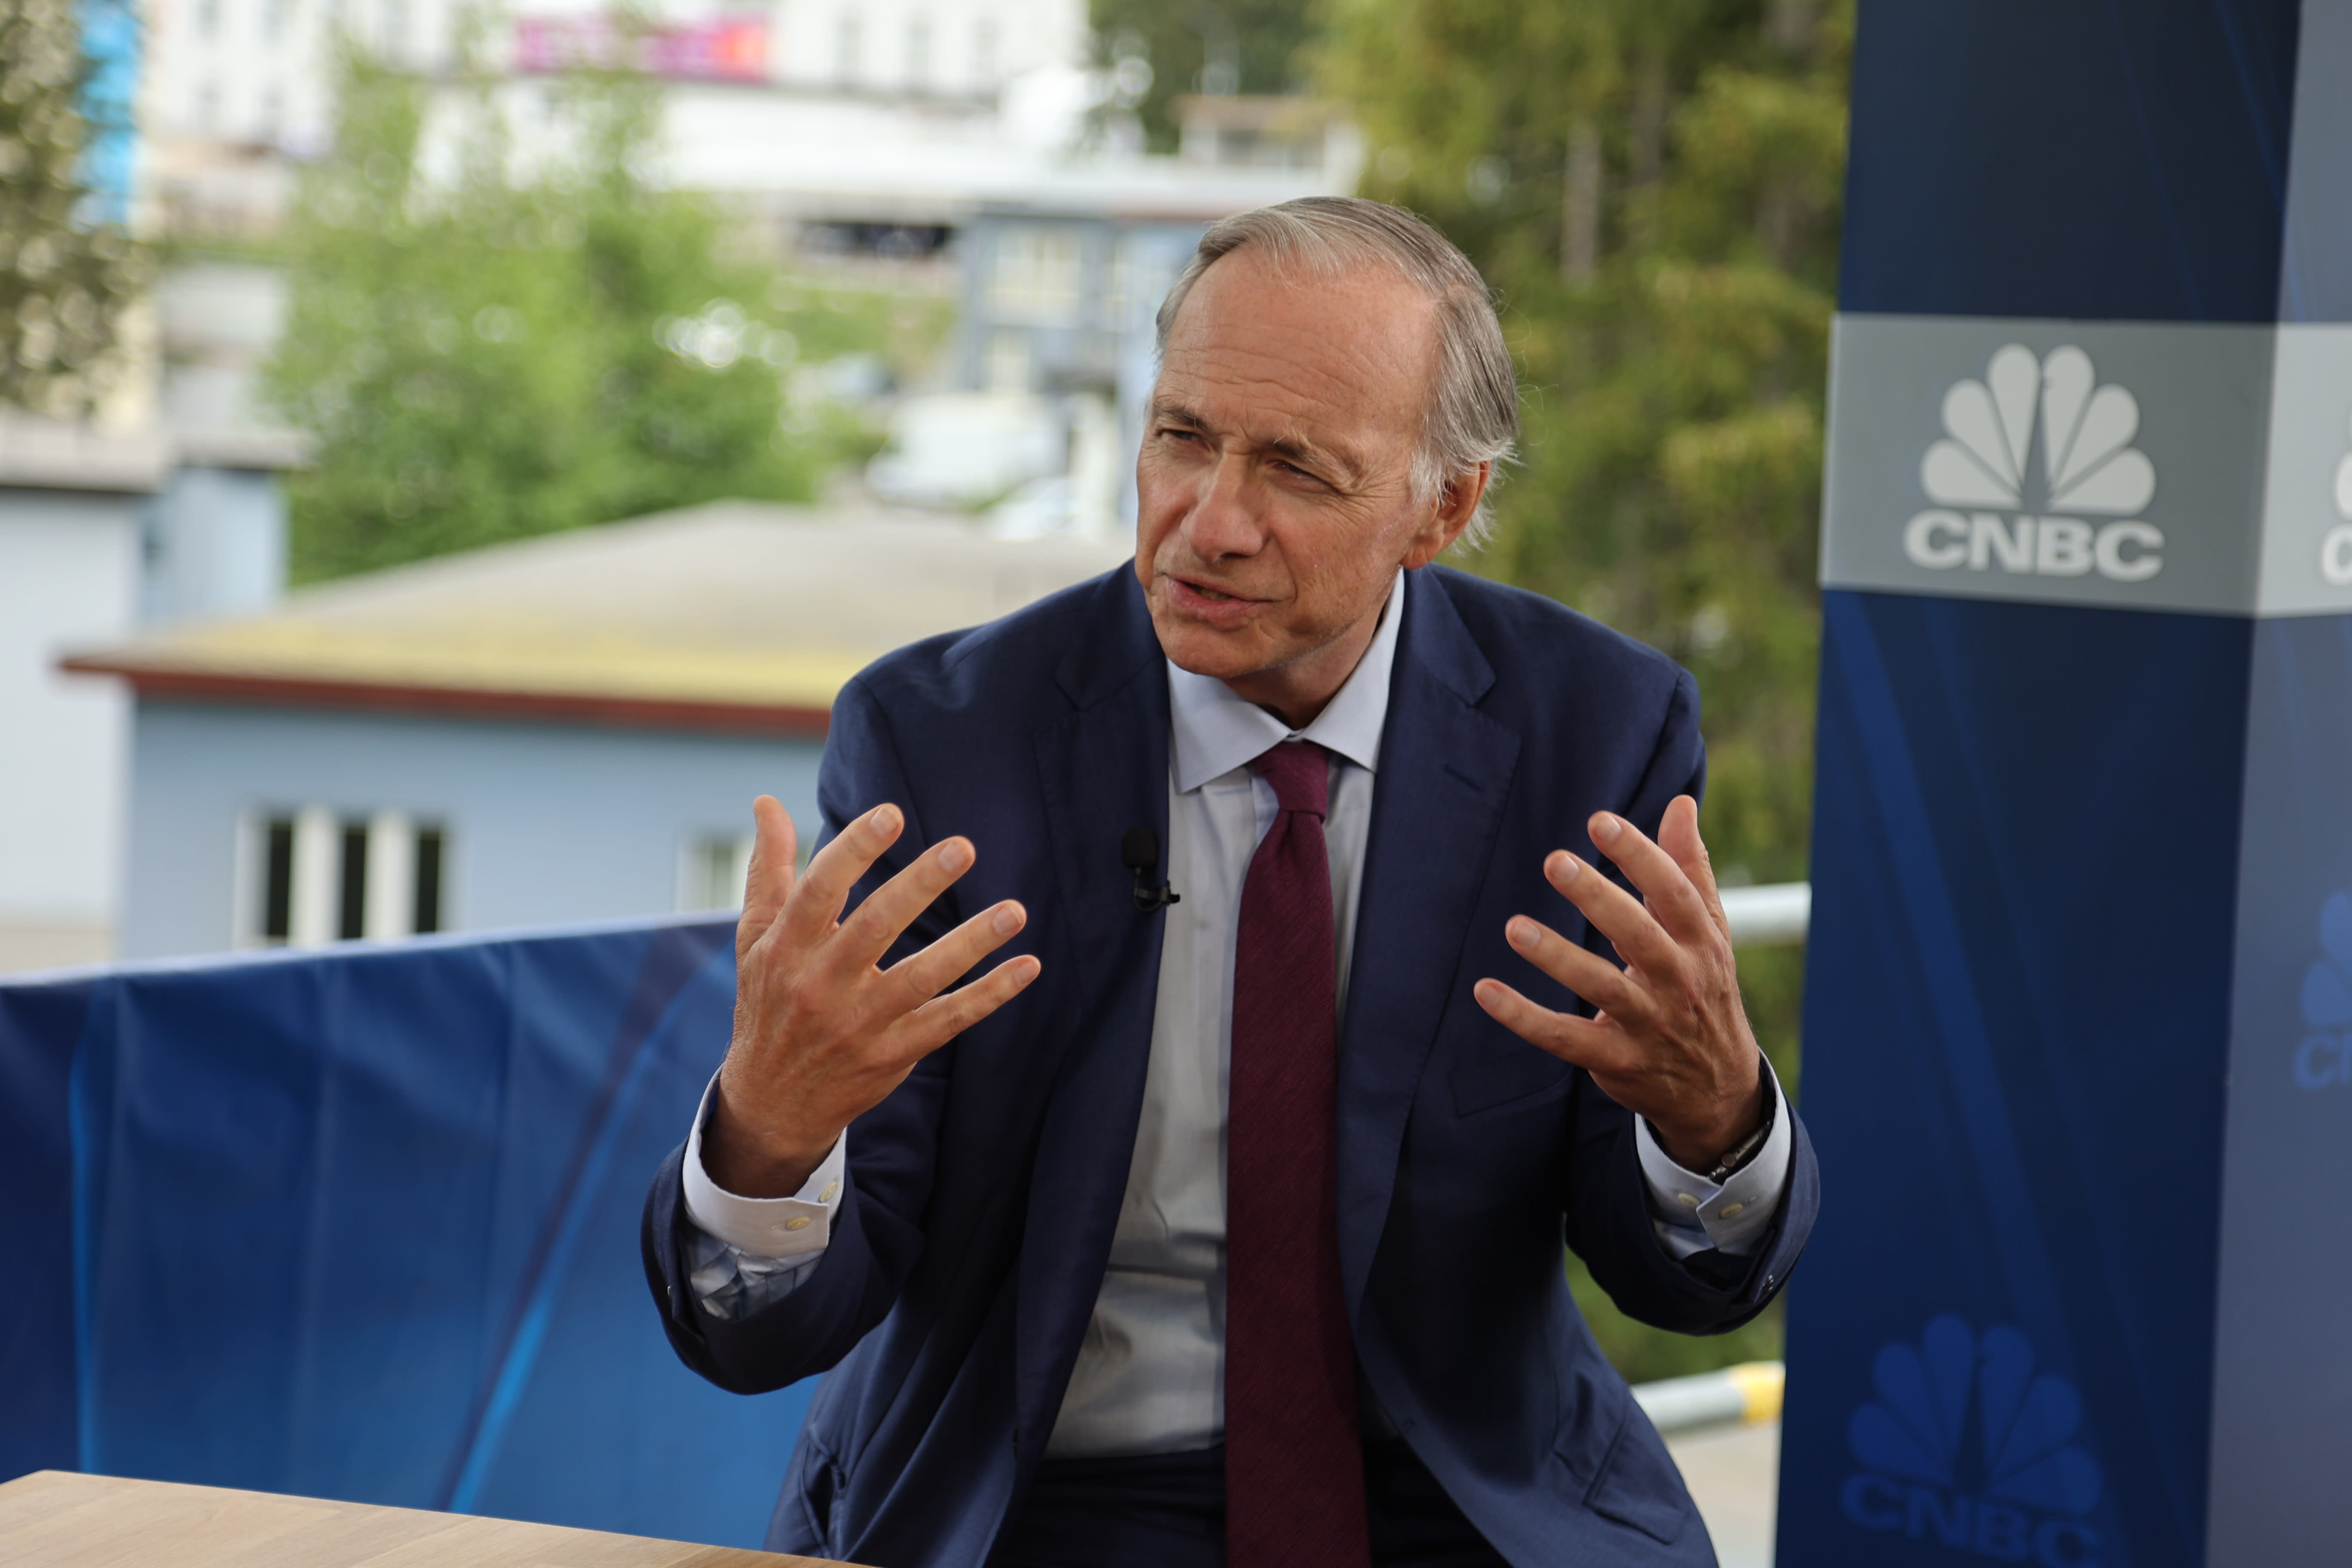 Ray Dalio says higher interest rates to crush inflation could send stock prices down 20%